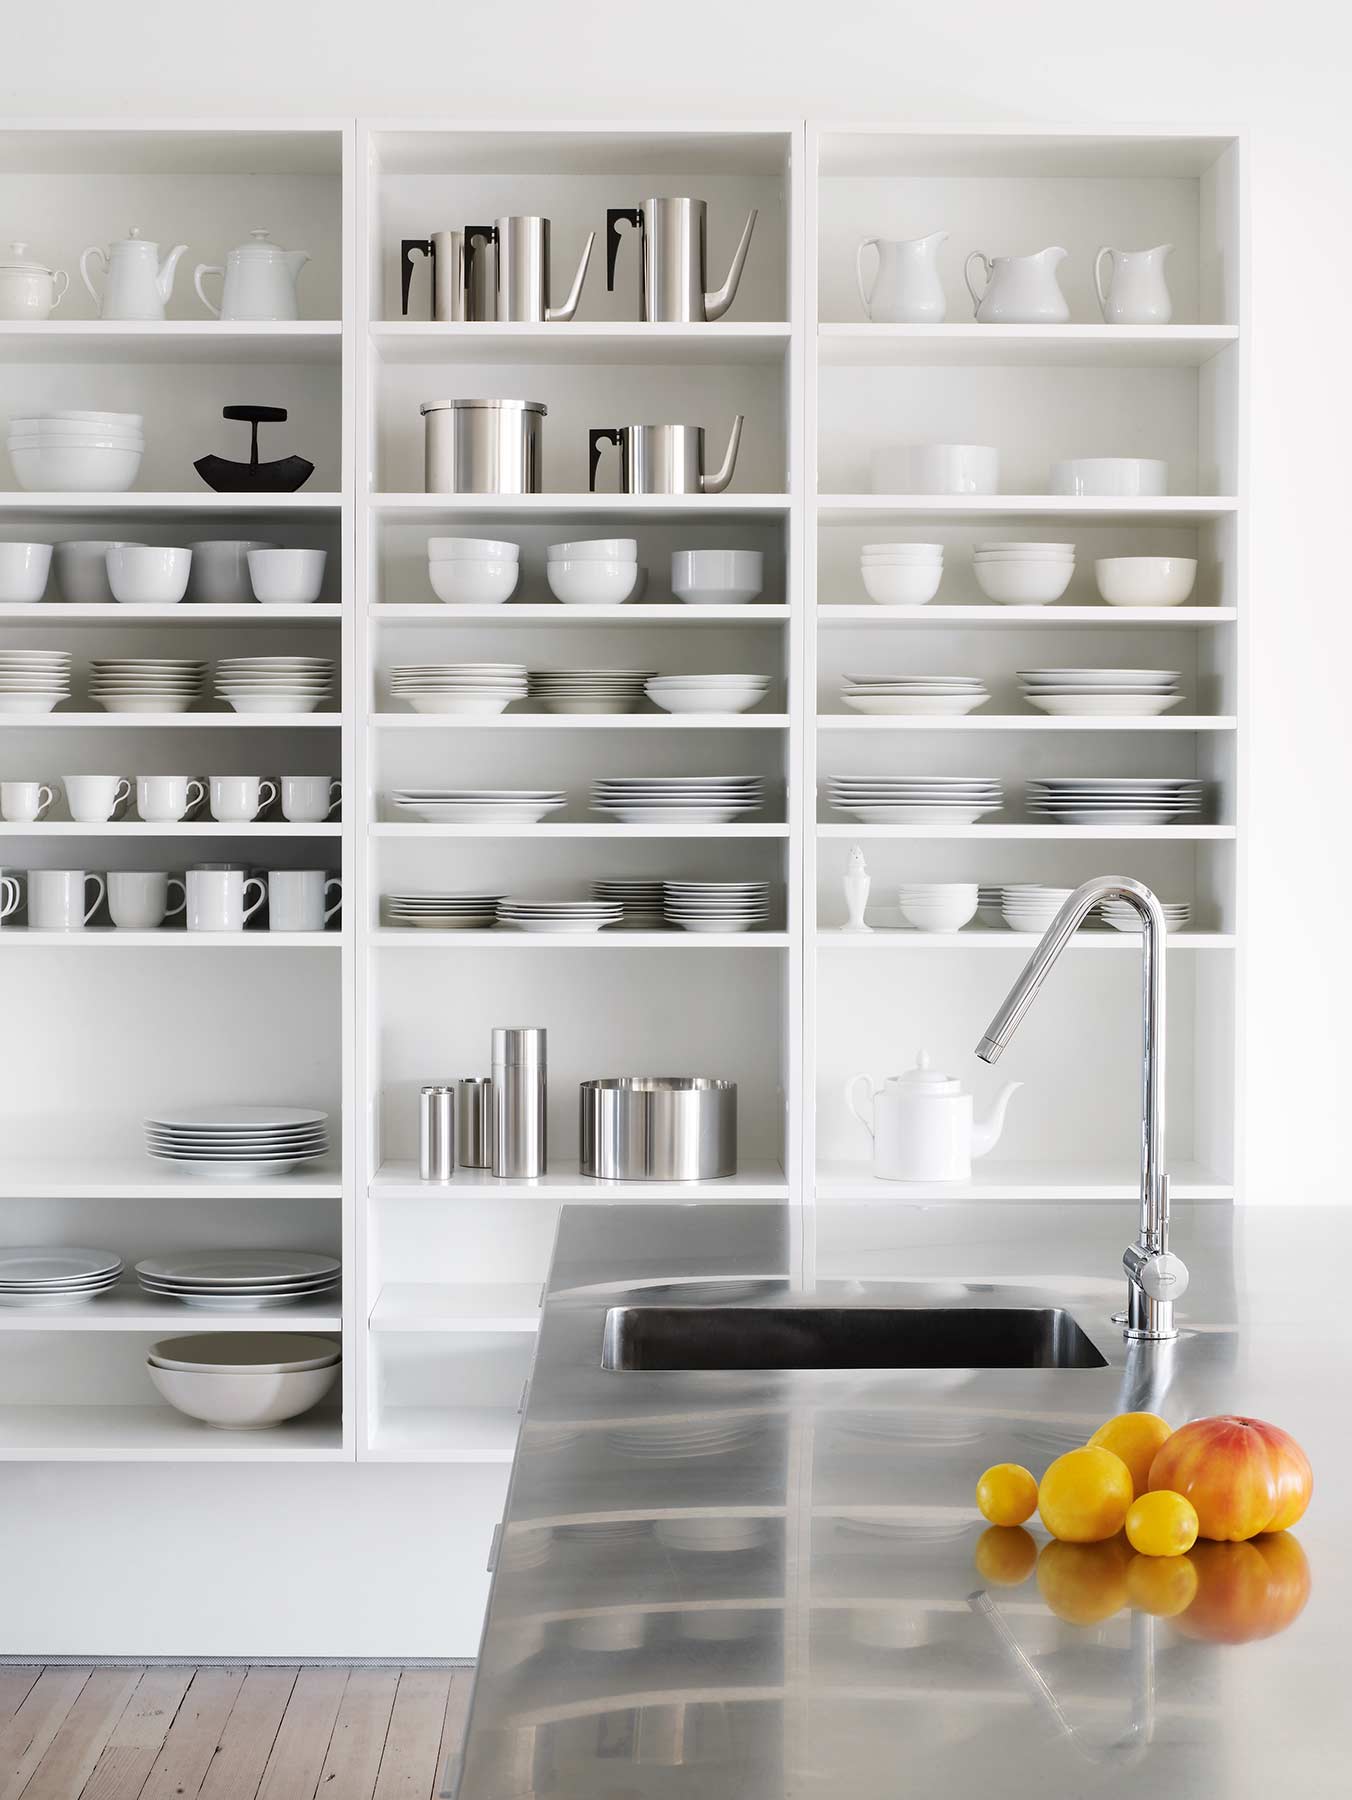 Interior of a well organized kitchen with clean white dishes